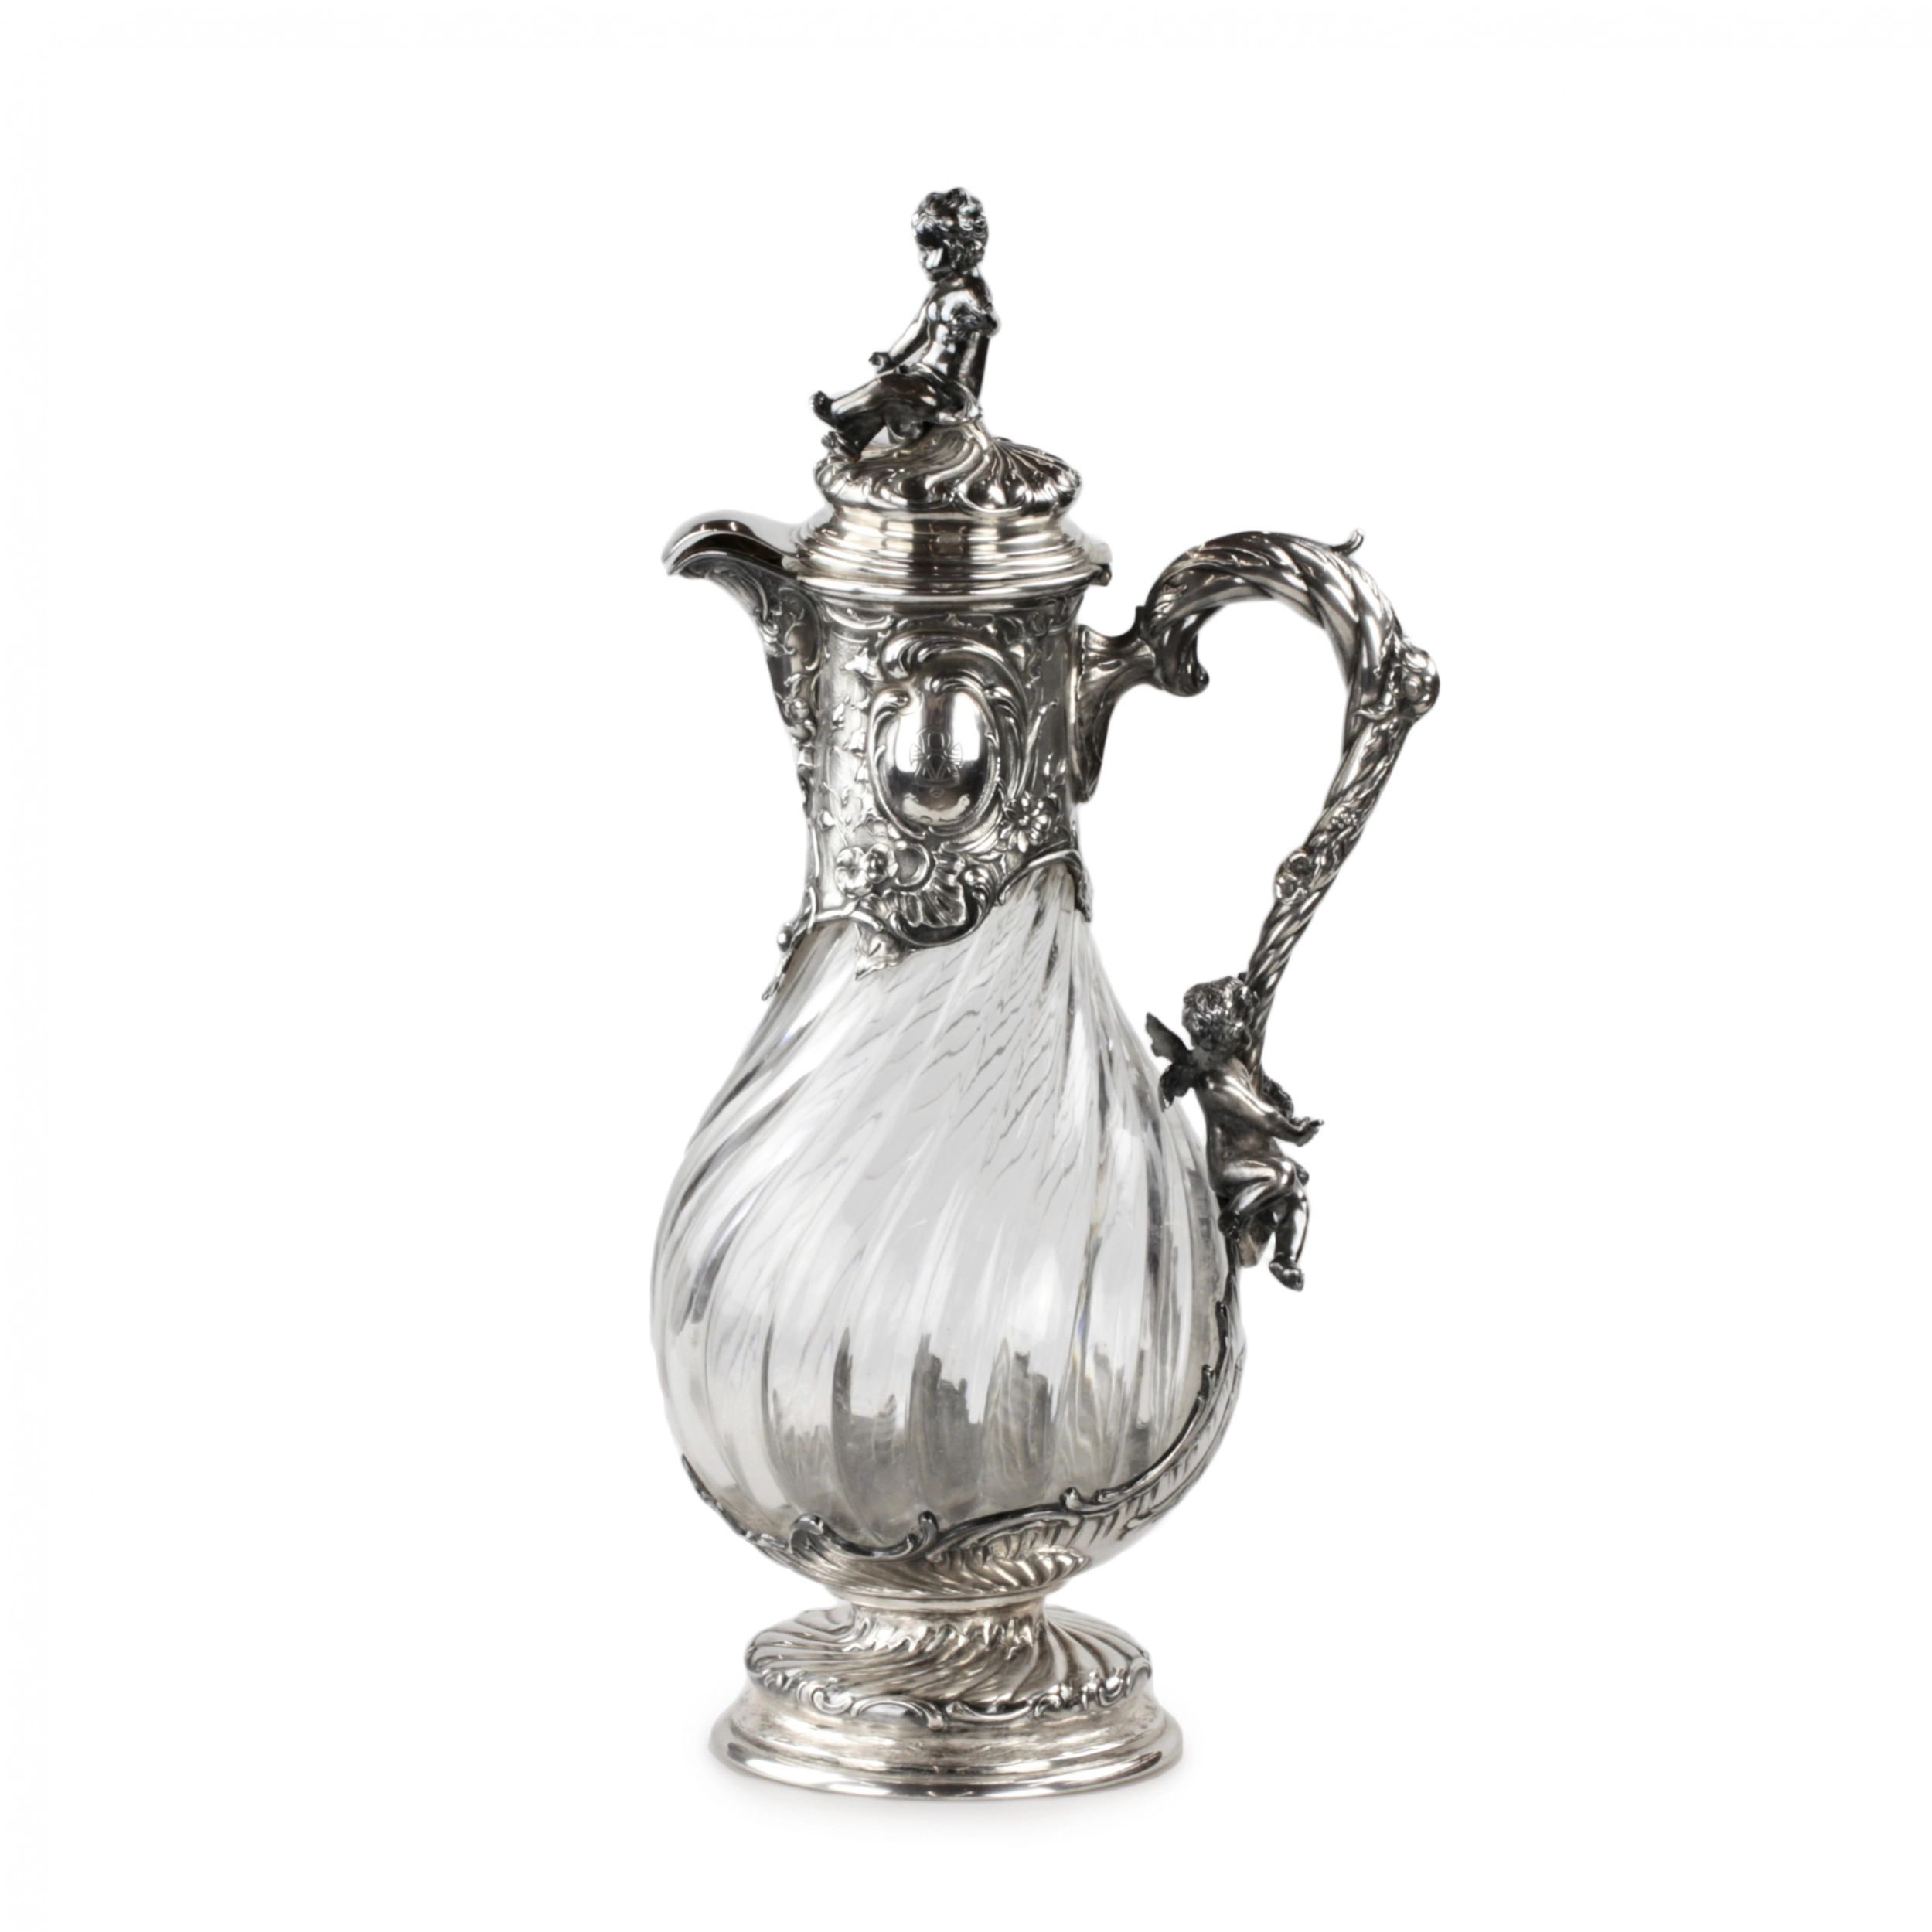 Exquisite-silver-wine-jug-in-the-power-of-Louis-XV